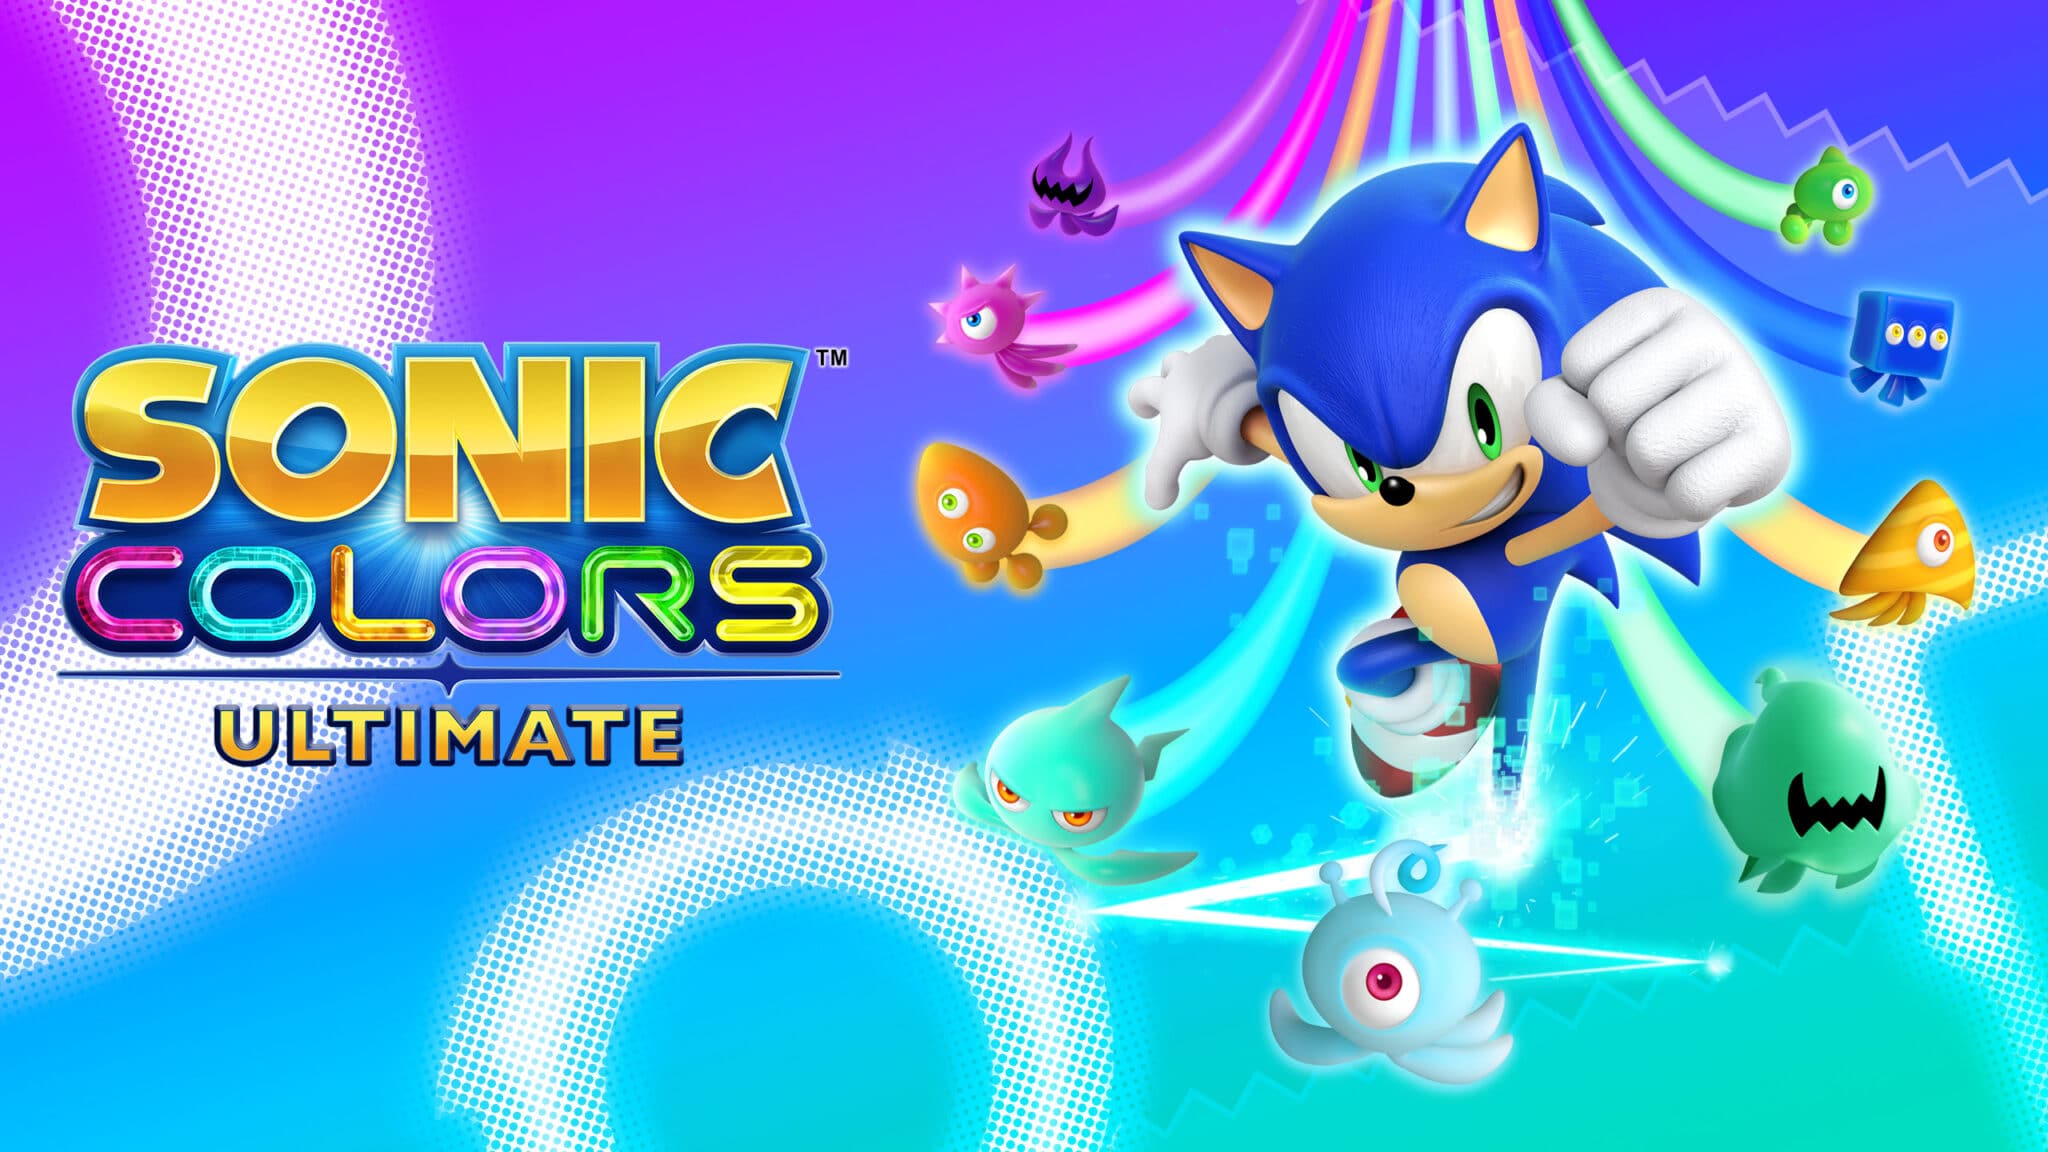 Sonic Colours Ultimate – Version 2.6 patch notes